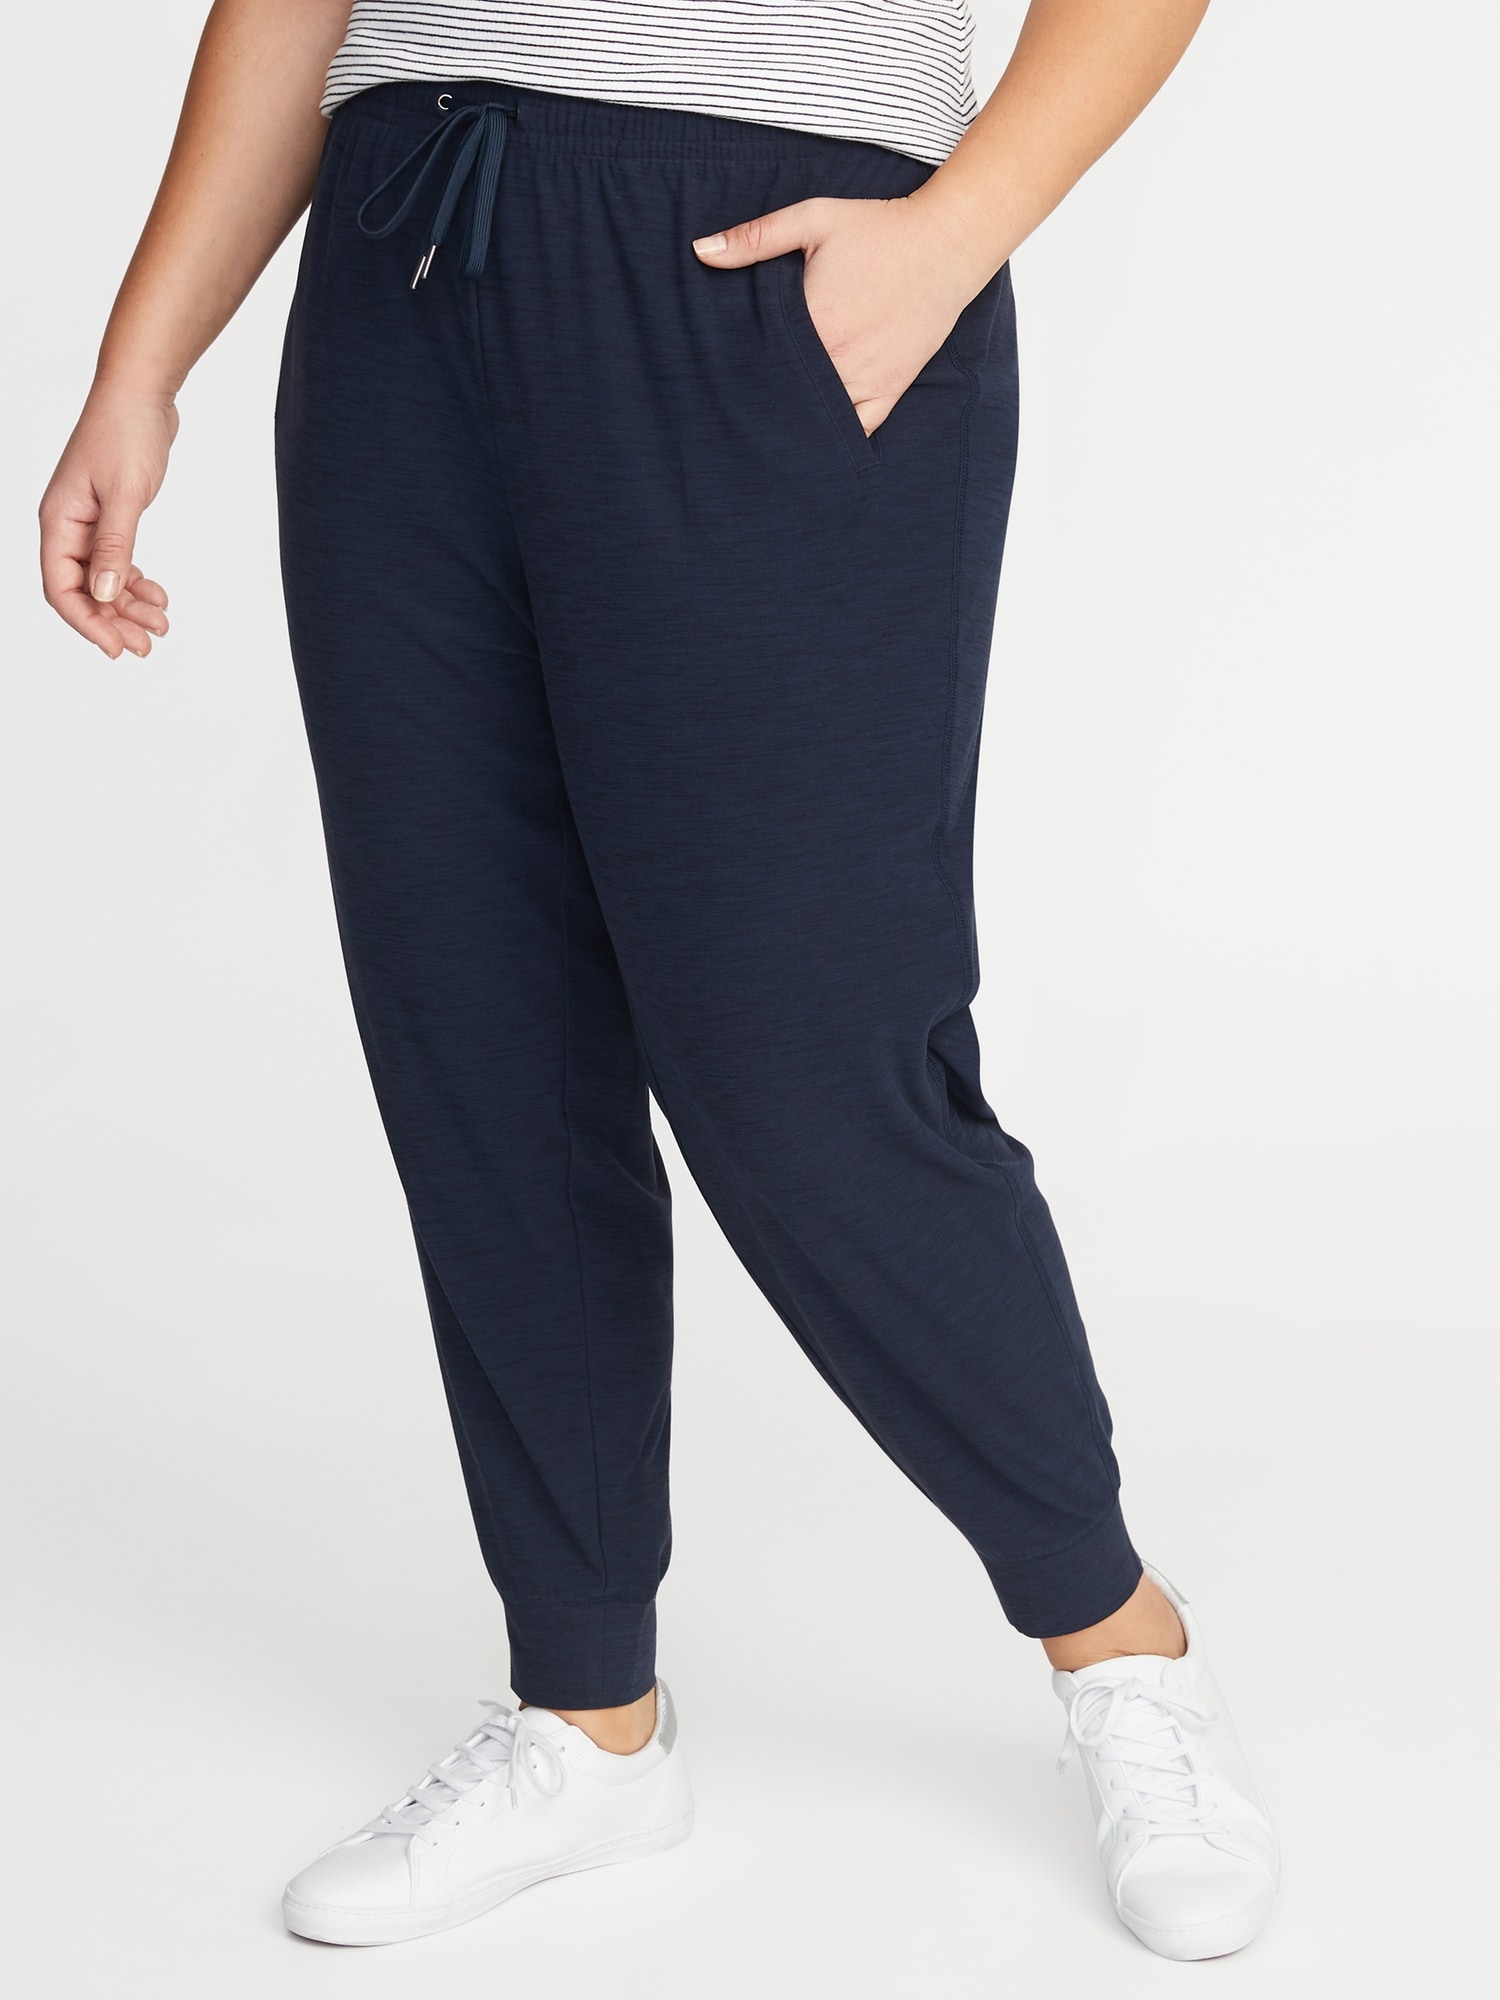 Active by Old Navy Blue Active Pants Size 4X (Plus) - 40% off